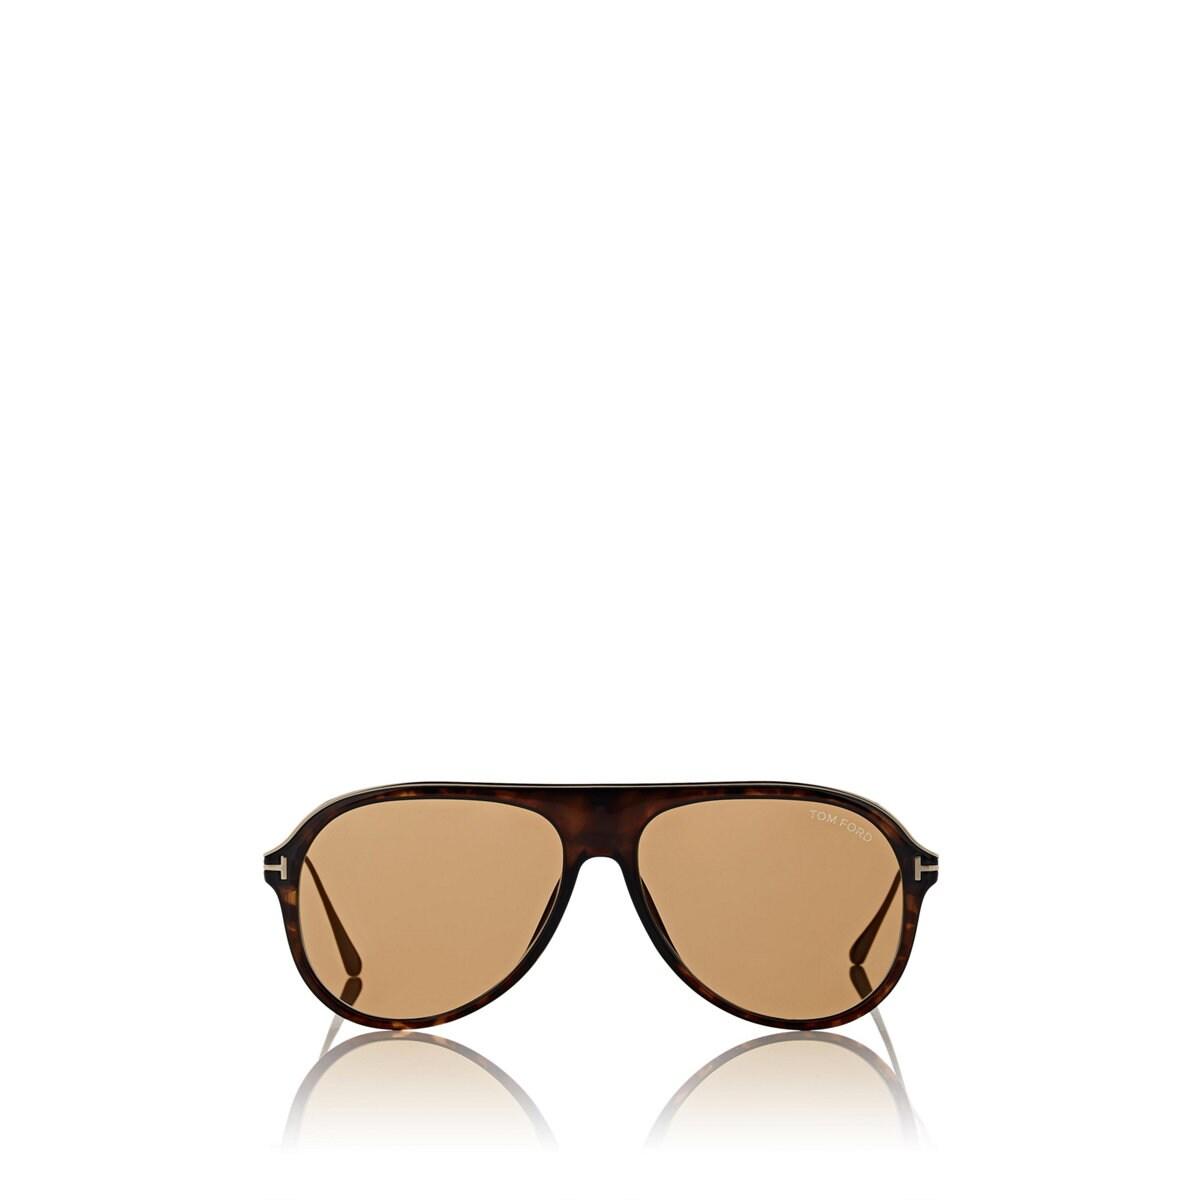 Tom Ford Nicholai Sunglasses in Brown for Men - Lyst